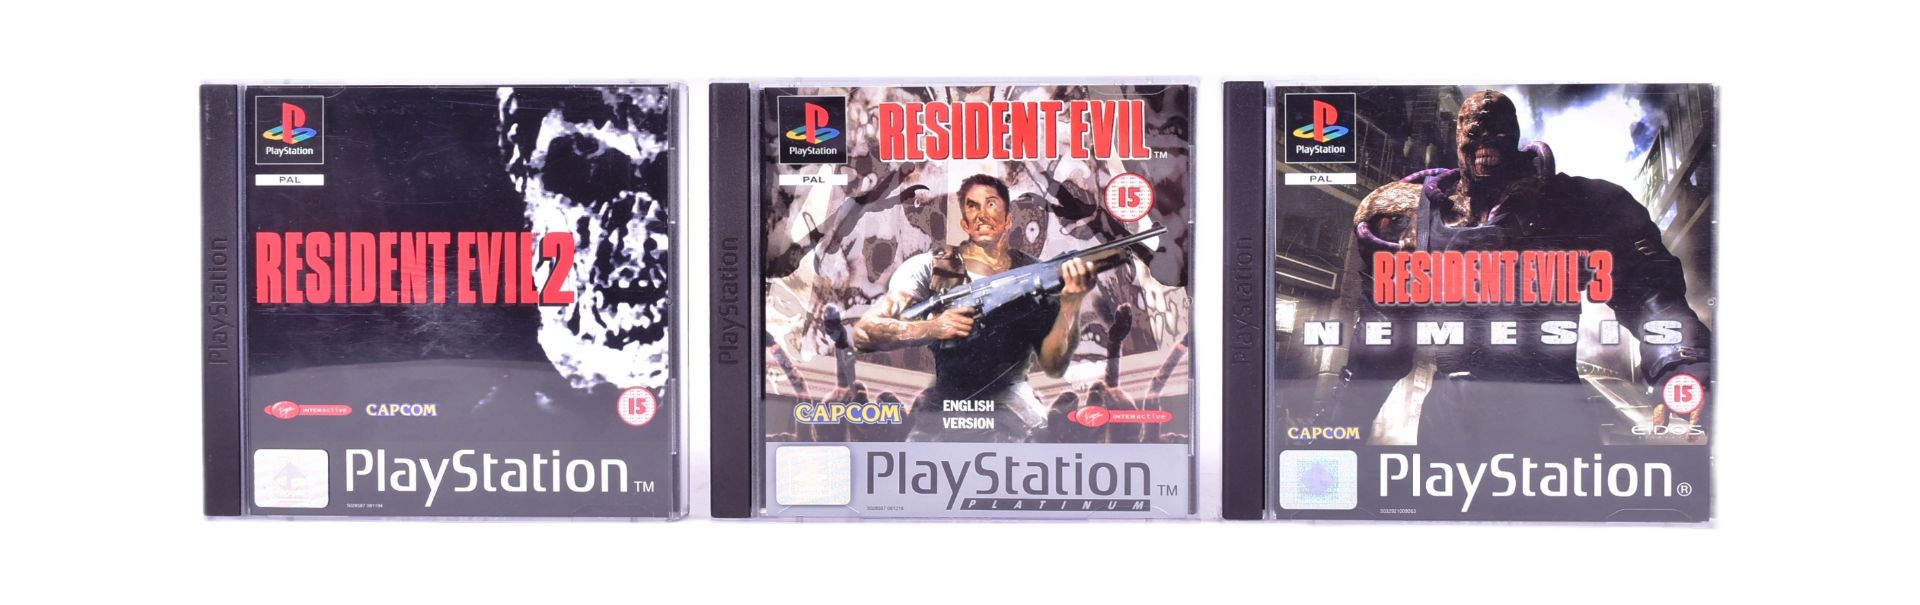 RETRO GAMING - PLAYSTATION ONE - RESIDENT EVIL 1 2 & 3